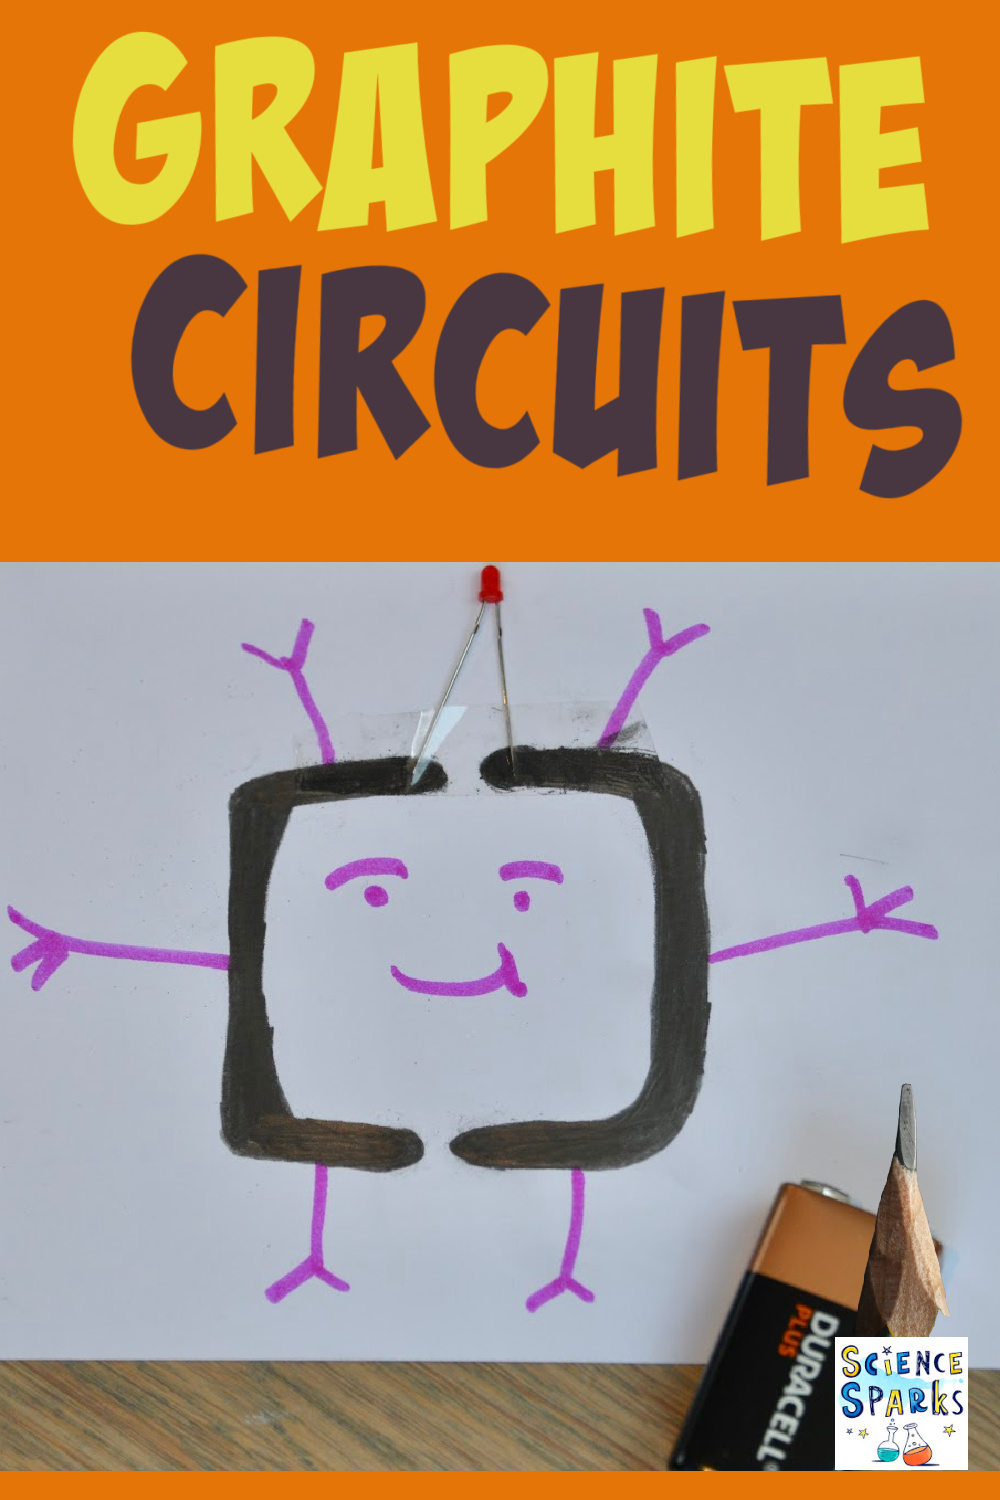 Circuit made using a graphite pencil, battery and LED